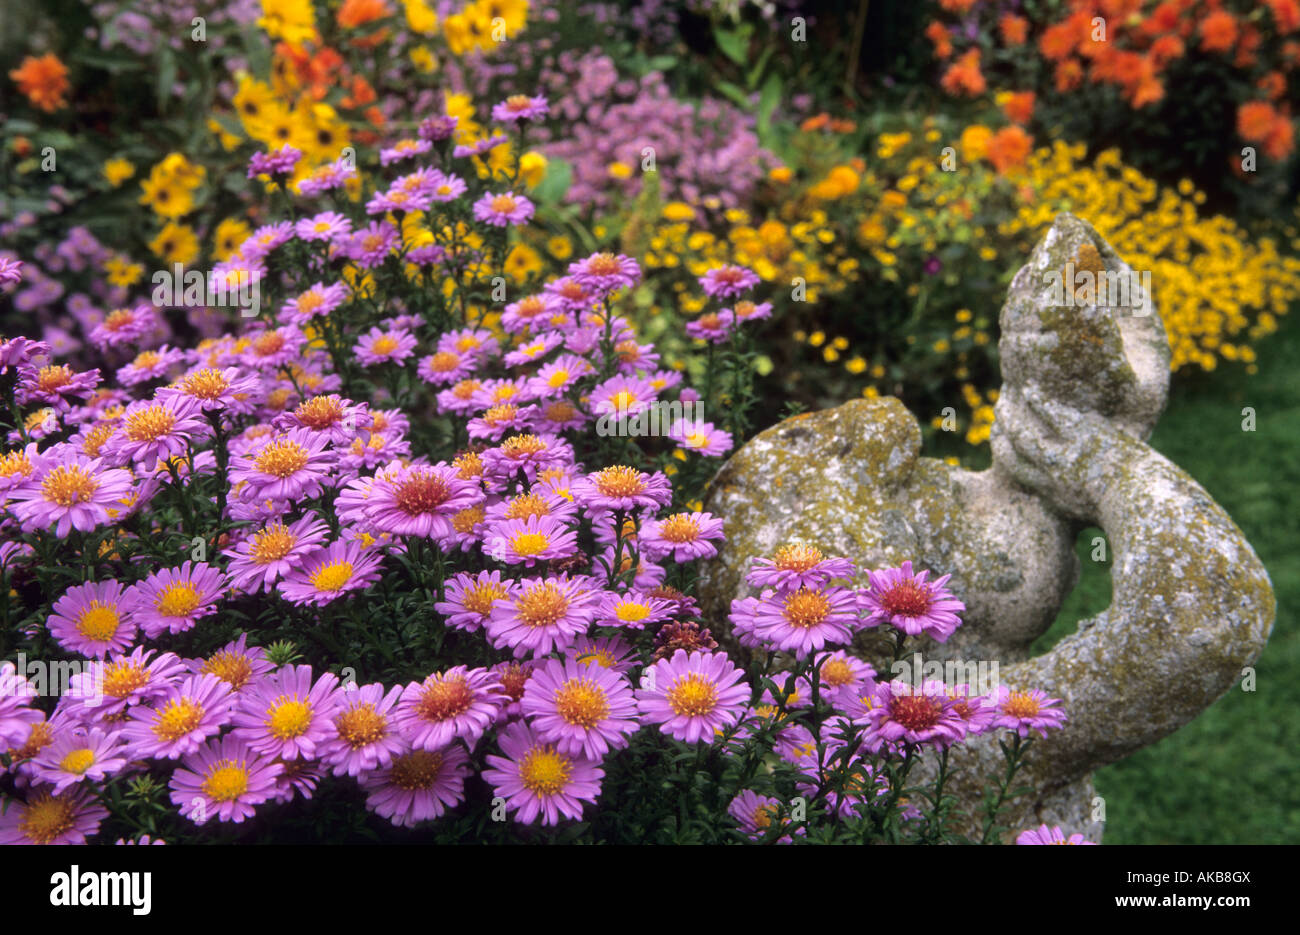 Maison Rose Giverny France contrasting colourful autumn flower combinations figurative statue Asters Dahlia Helianthemum Stock Photo